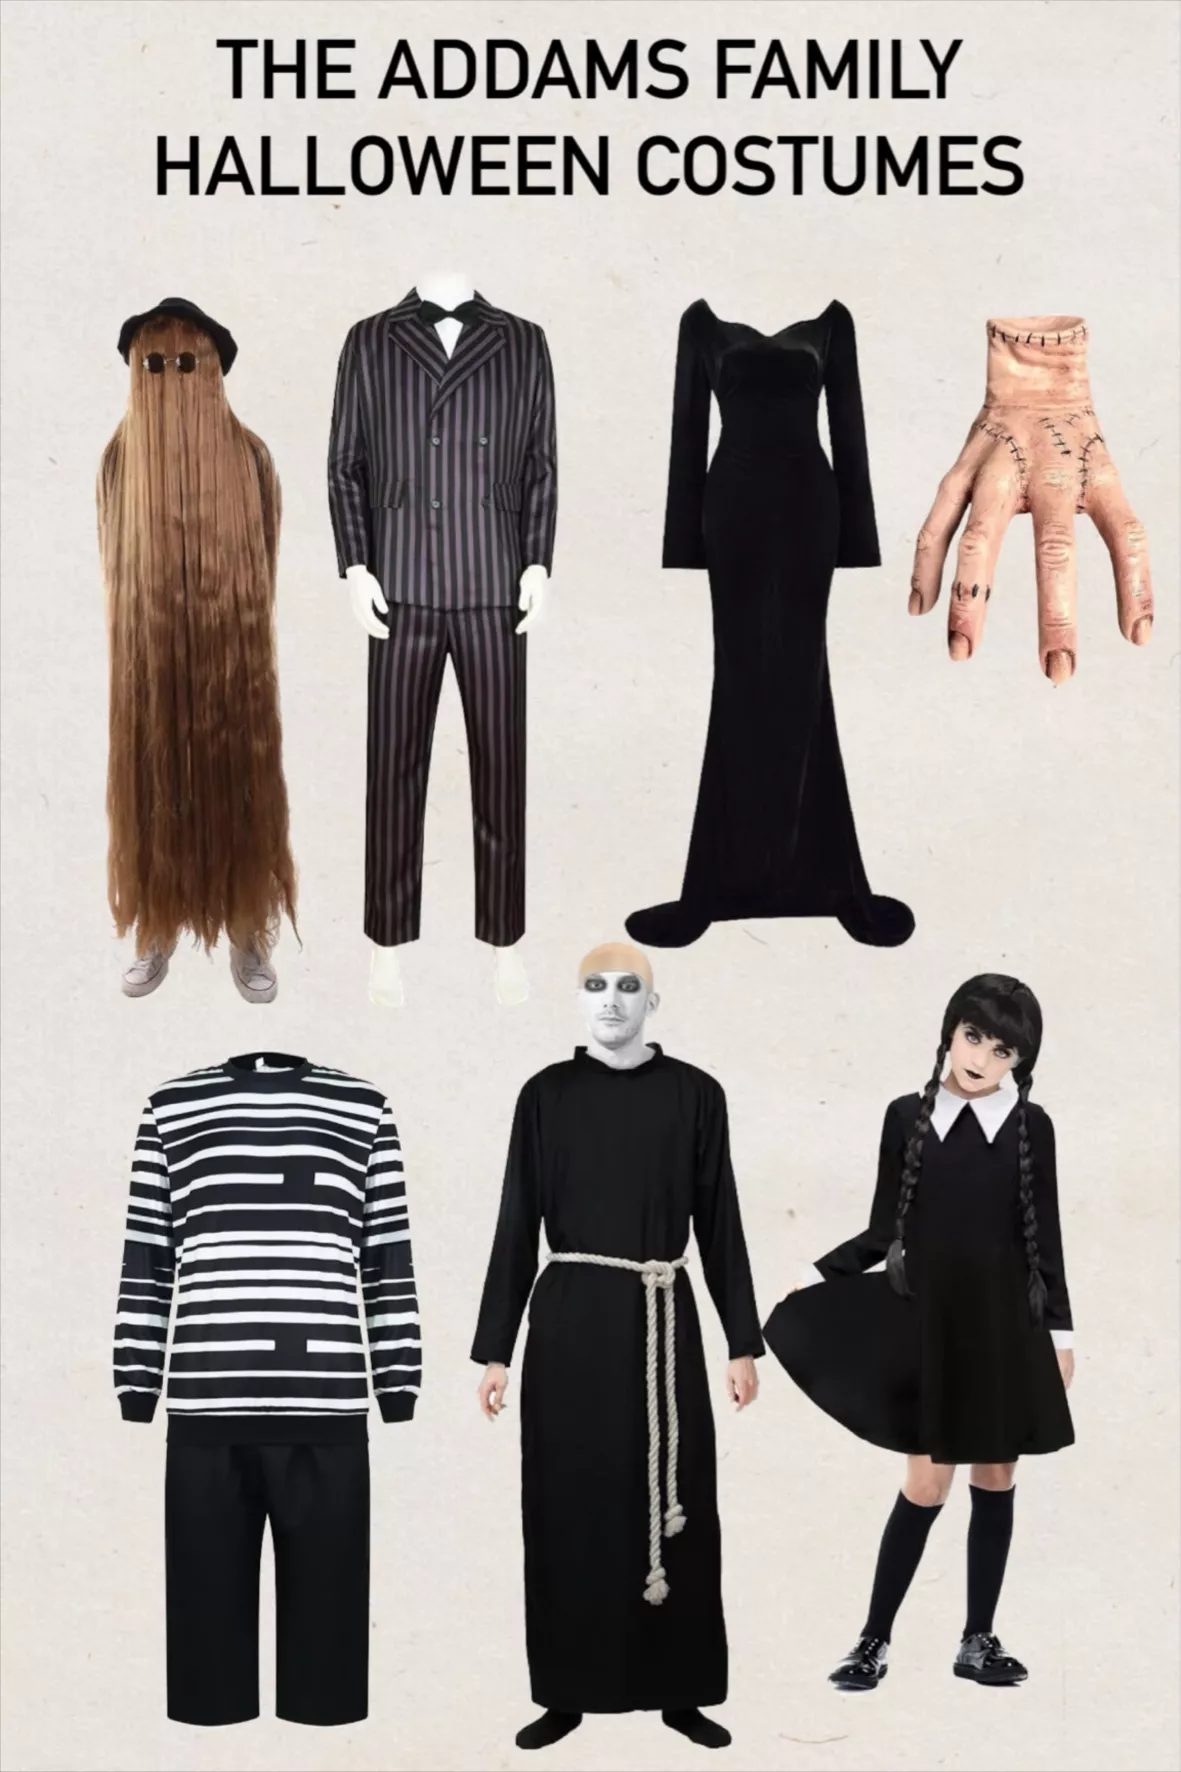 Wednesday Addams Thing Hand Latex Halloween Decoration Photo Props Net